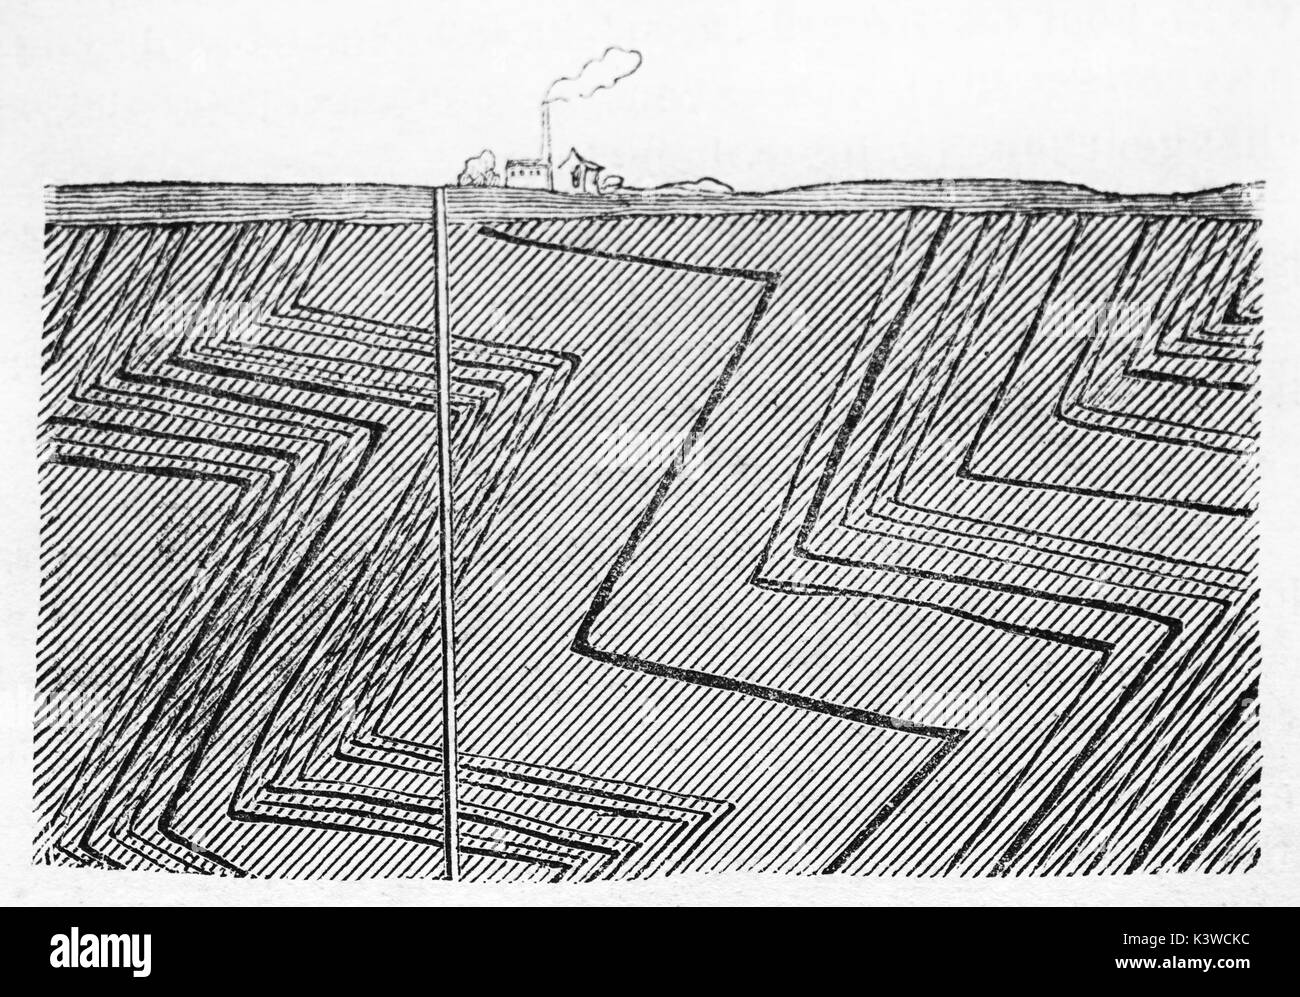 Cutaway view of the ground showing the arrangement of the coal beds. By unidentified author, published on Magasin Pittoresque, Paris, 1841 Stock Photo